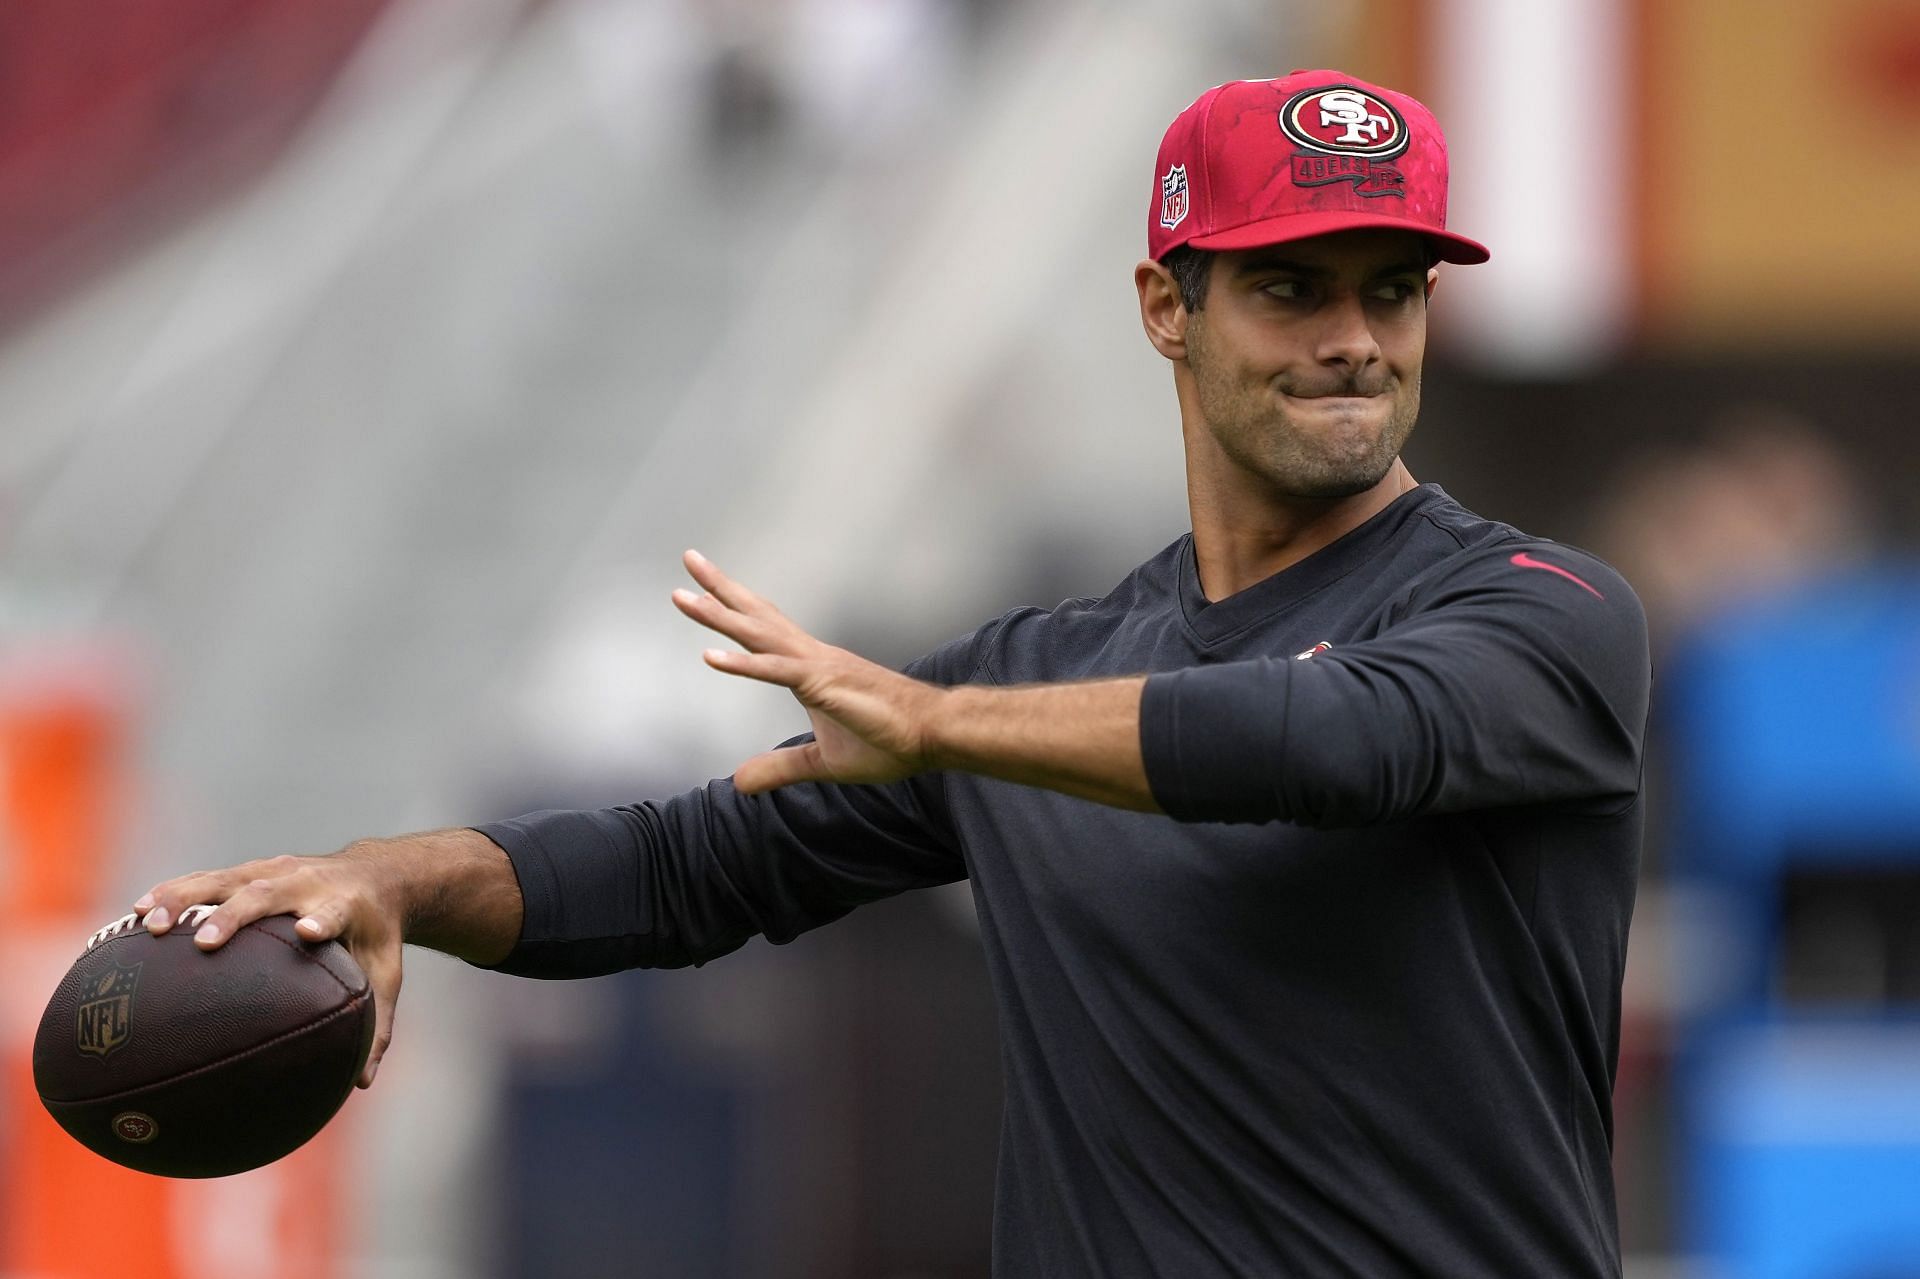 Jimmy Garoppolo #10 of the San Francisco 49ers during warmups before the game against the Seattle Seahawks